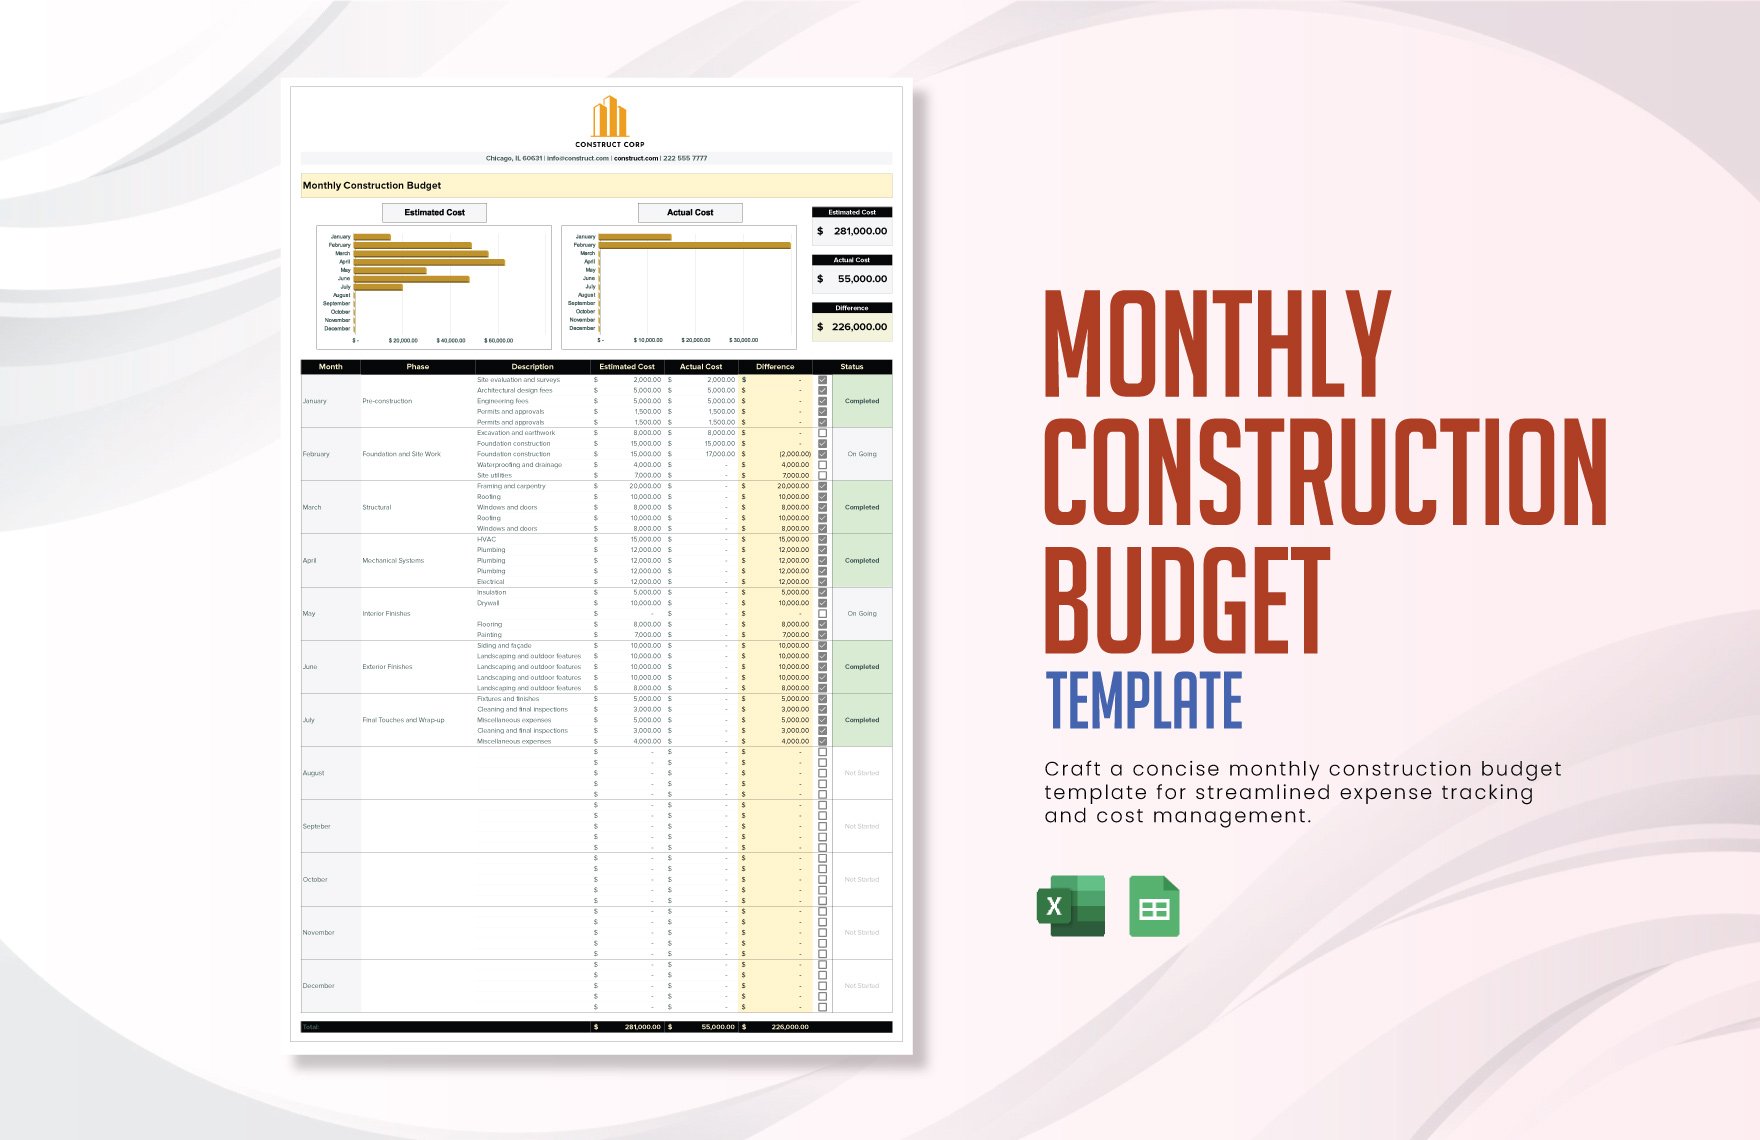 Monthly Construction Budget Template